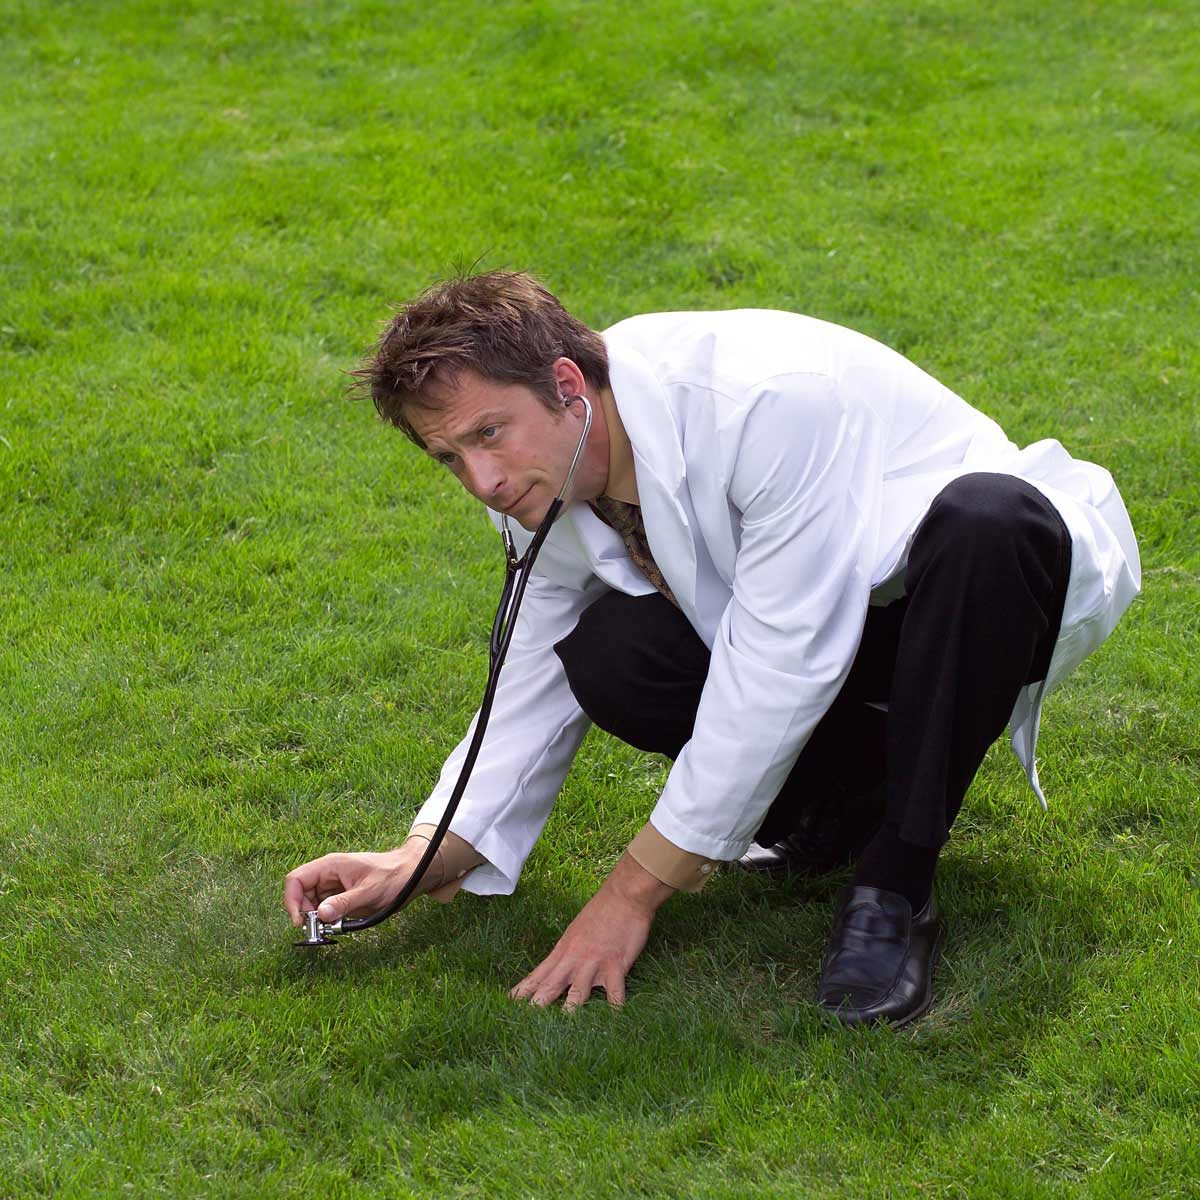 Top 10 Lawn Care Tips